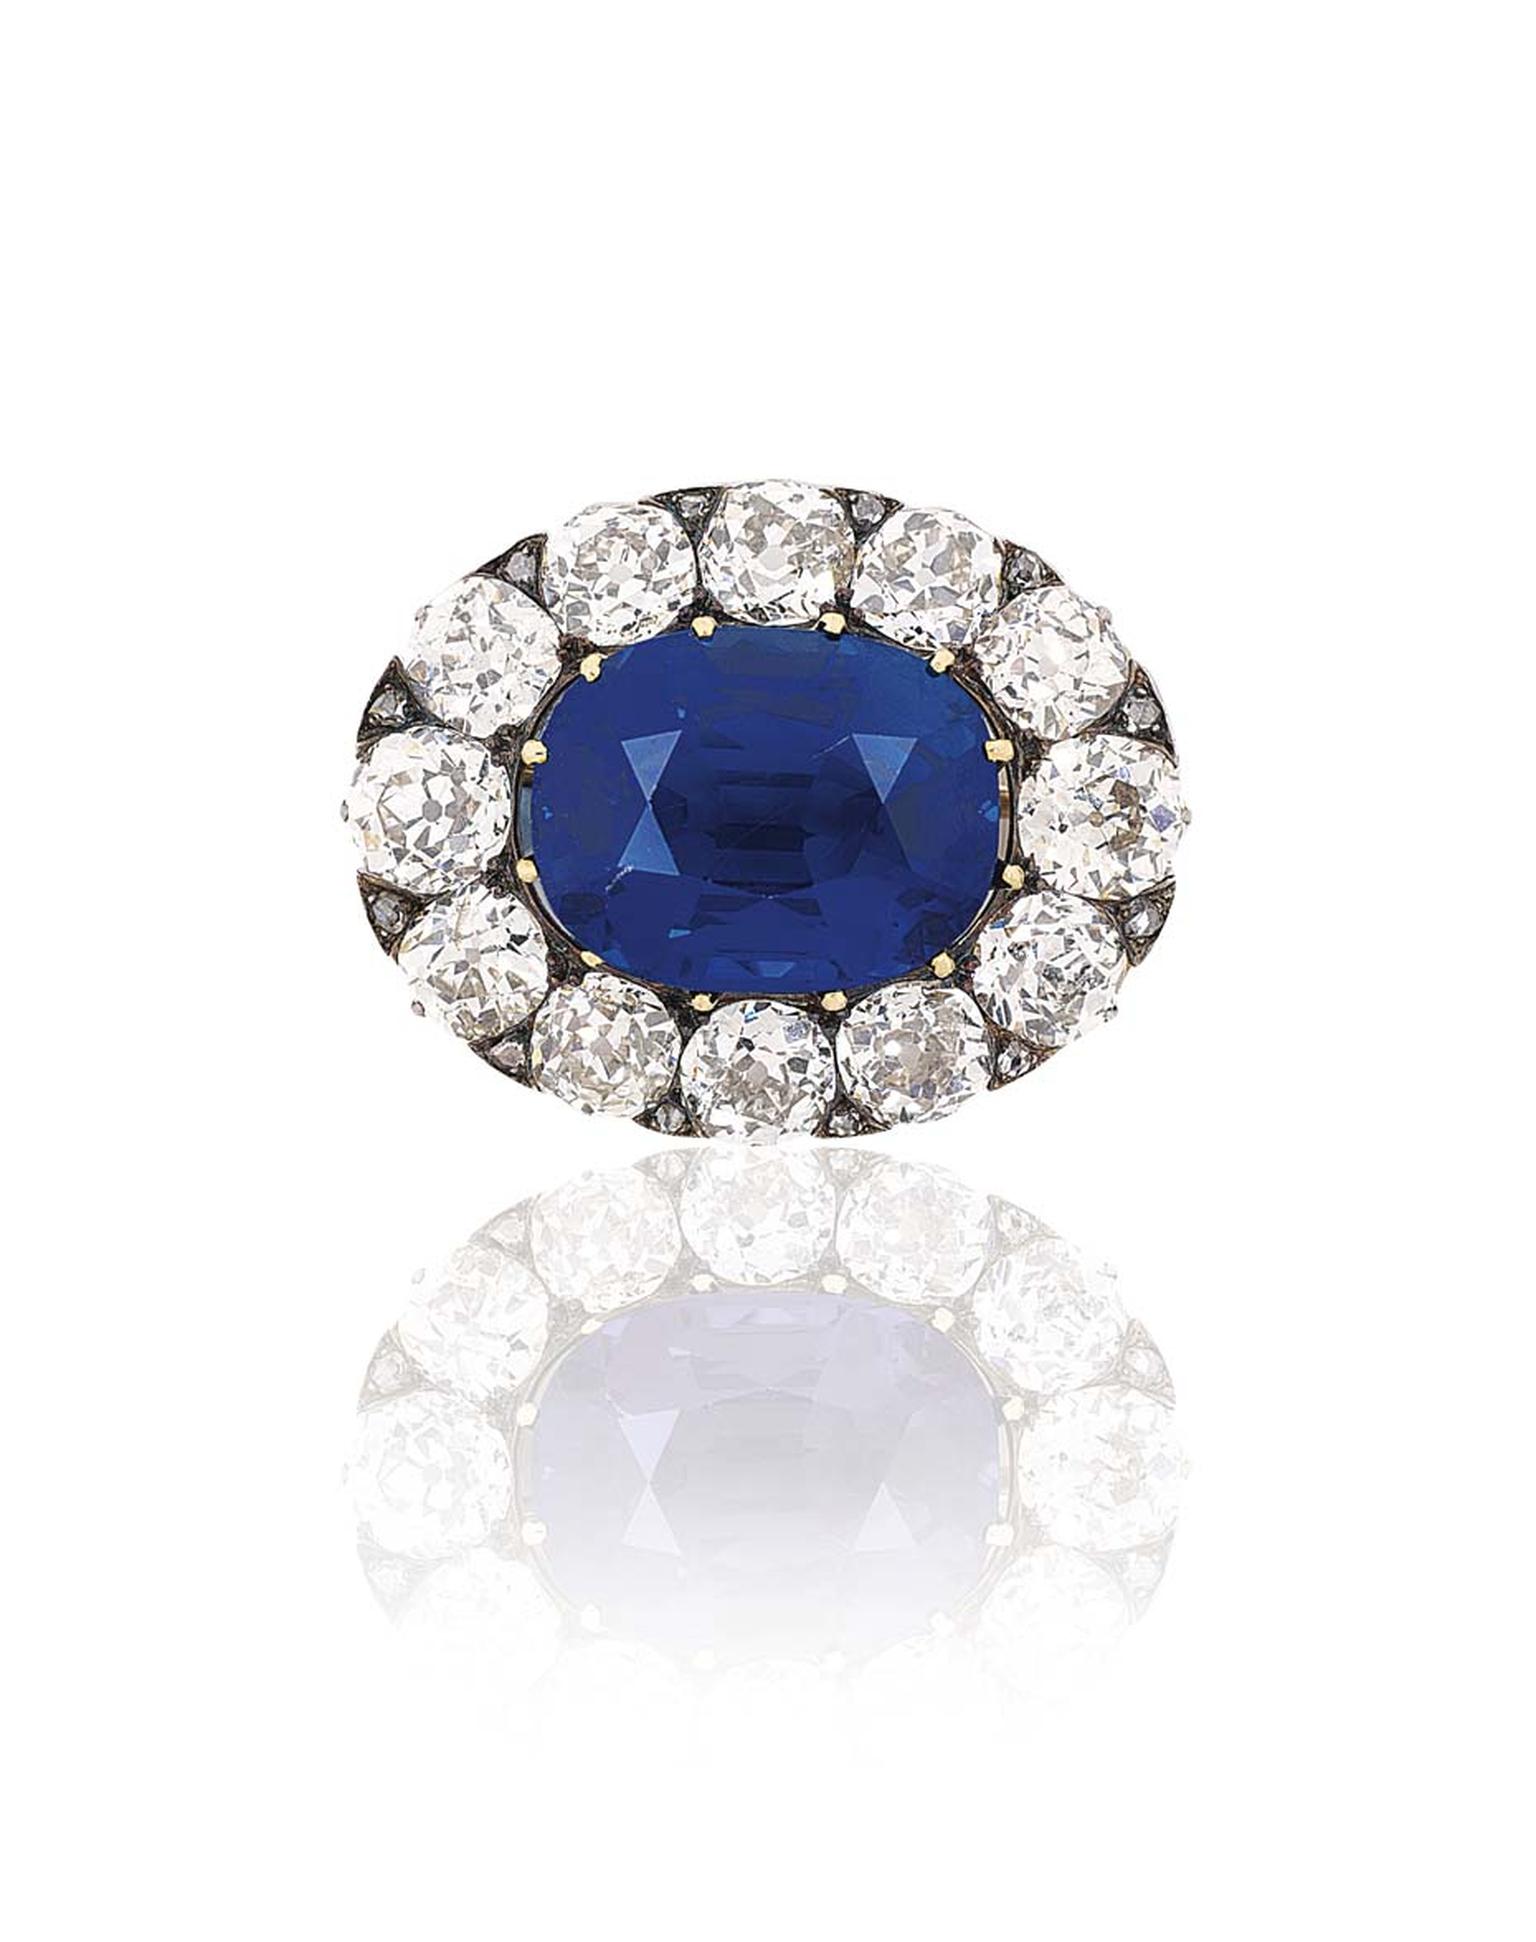 The star of Christie's Important Jewels sale on 26 November 2014 was Lot 444, a remarkable 14.66ct Kashmir sapphire, formerly the property of Evelina Rothschild, set in a Belle Epoque brooch surrounded by a cluster of old-cut diamonds. It sold for £1,398,